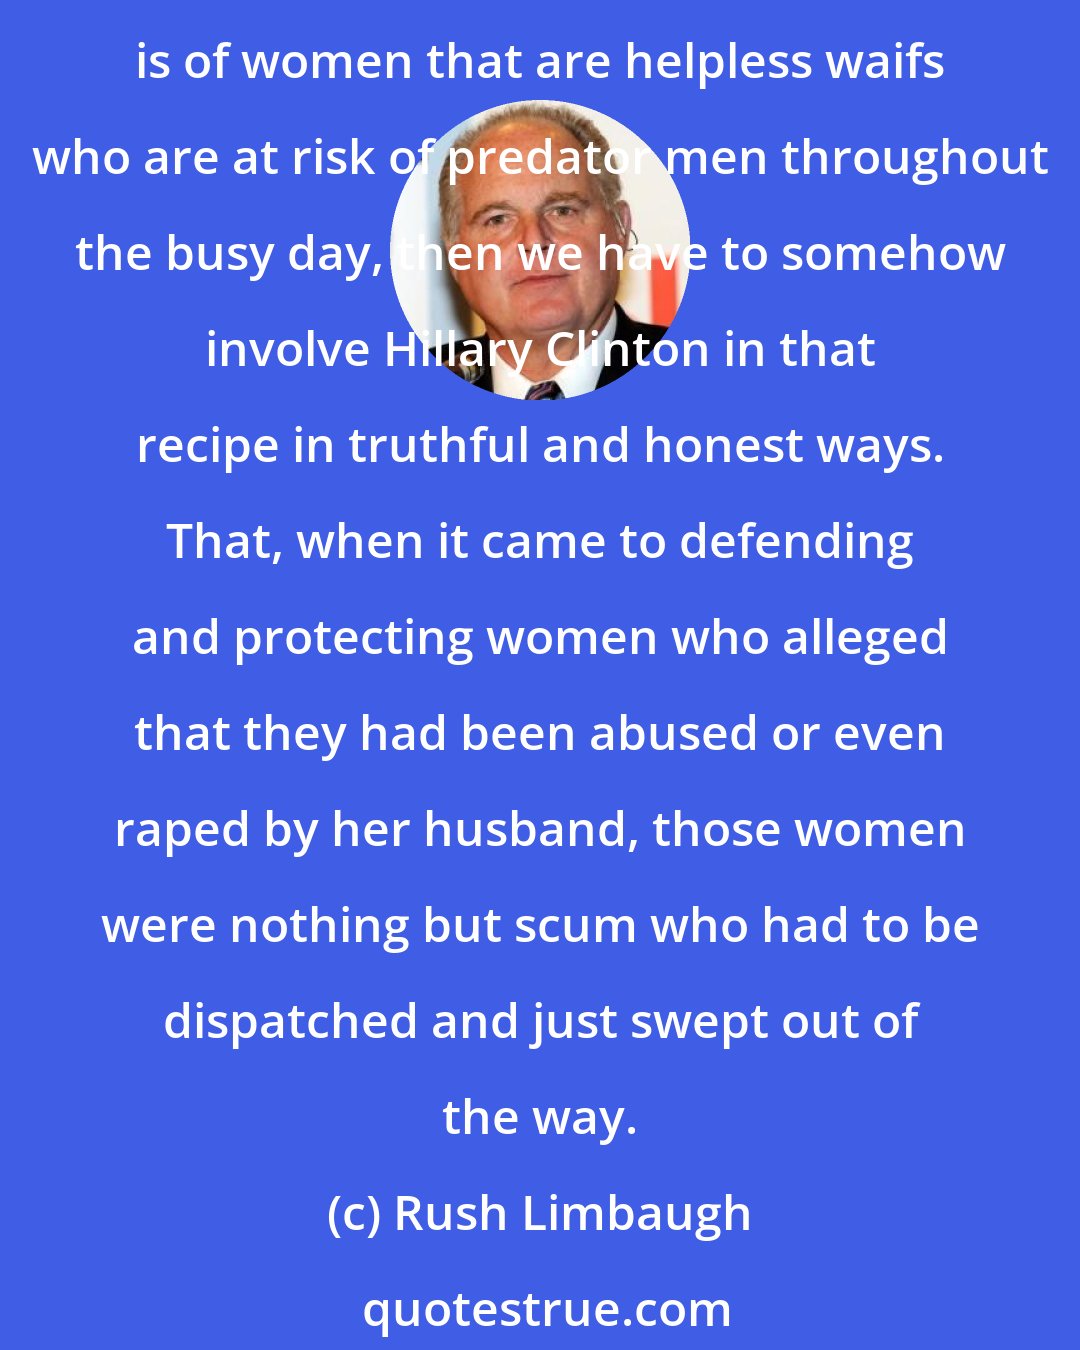 Rush Limbaugh: If women have become innocent victims, if women running around today are unable to protect themselves, if the picture that we're painting, if the caricature we are creating is of women that are helpless waifs who are at risk of predator men throughout the busy day, then we have to somehow involve Hillary Clinton in that recipe in truthful and honest ways. That, when it came to defending and protecting women who alleged that they had been abused or even raped by her husband, those women were nothing but scum who had to be dispatched and just swept out of the way.